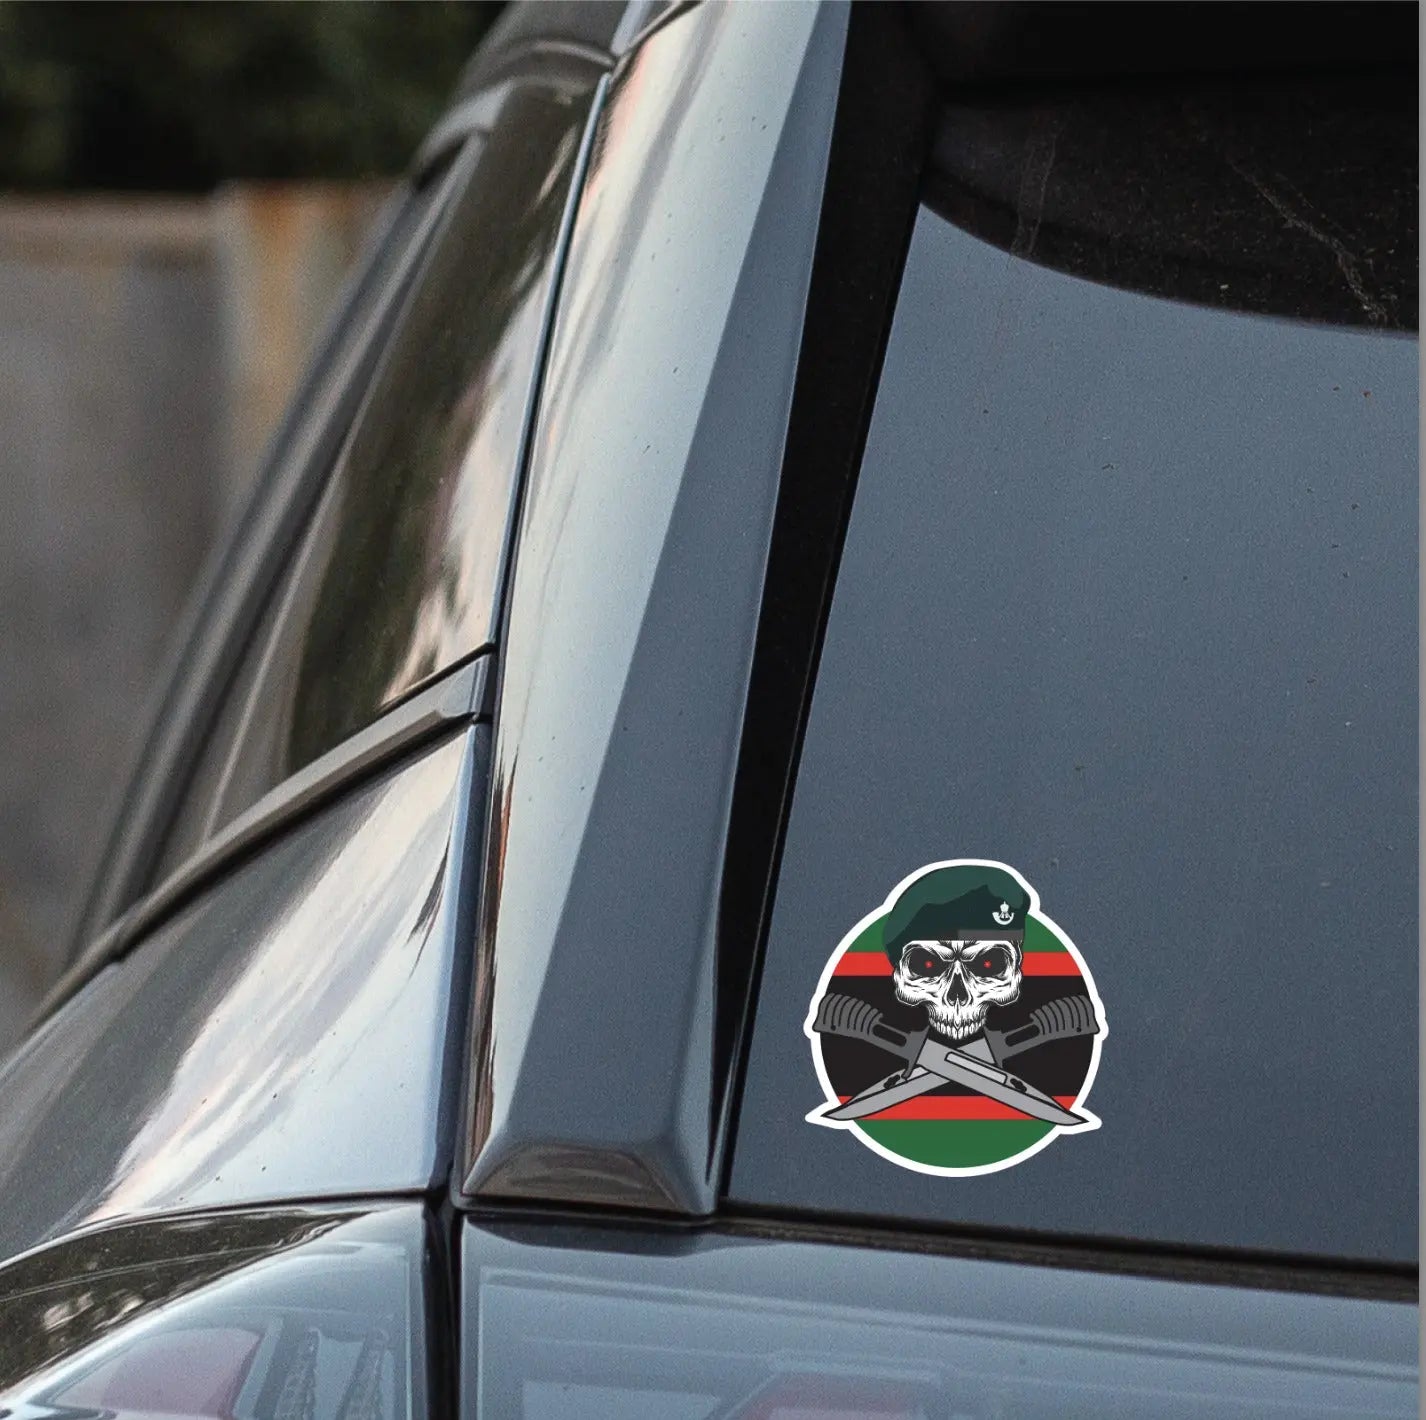 The Rifles Car Decal - Stylish Skull and Crossed Bayonets Design redplume